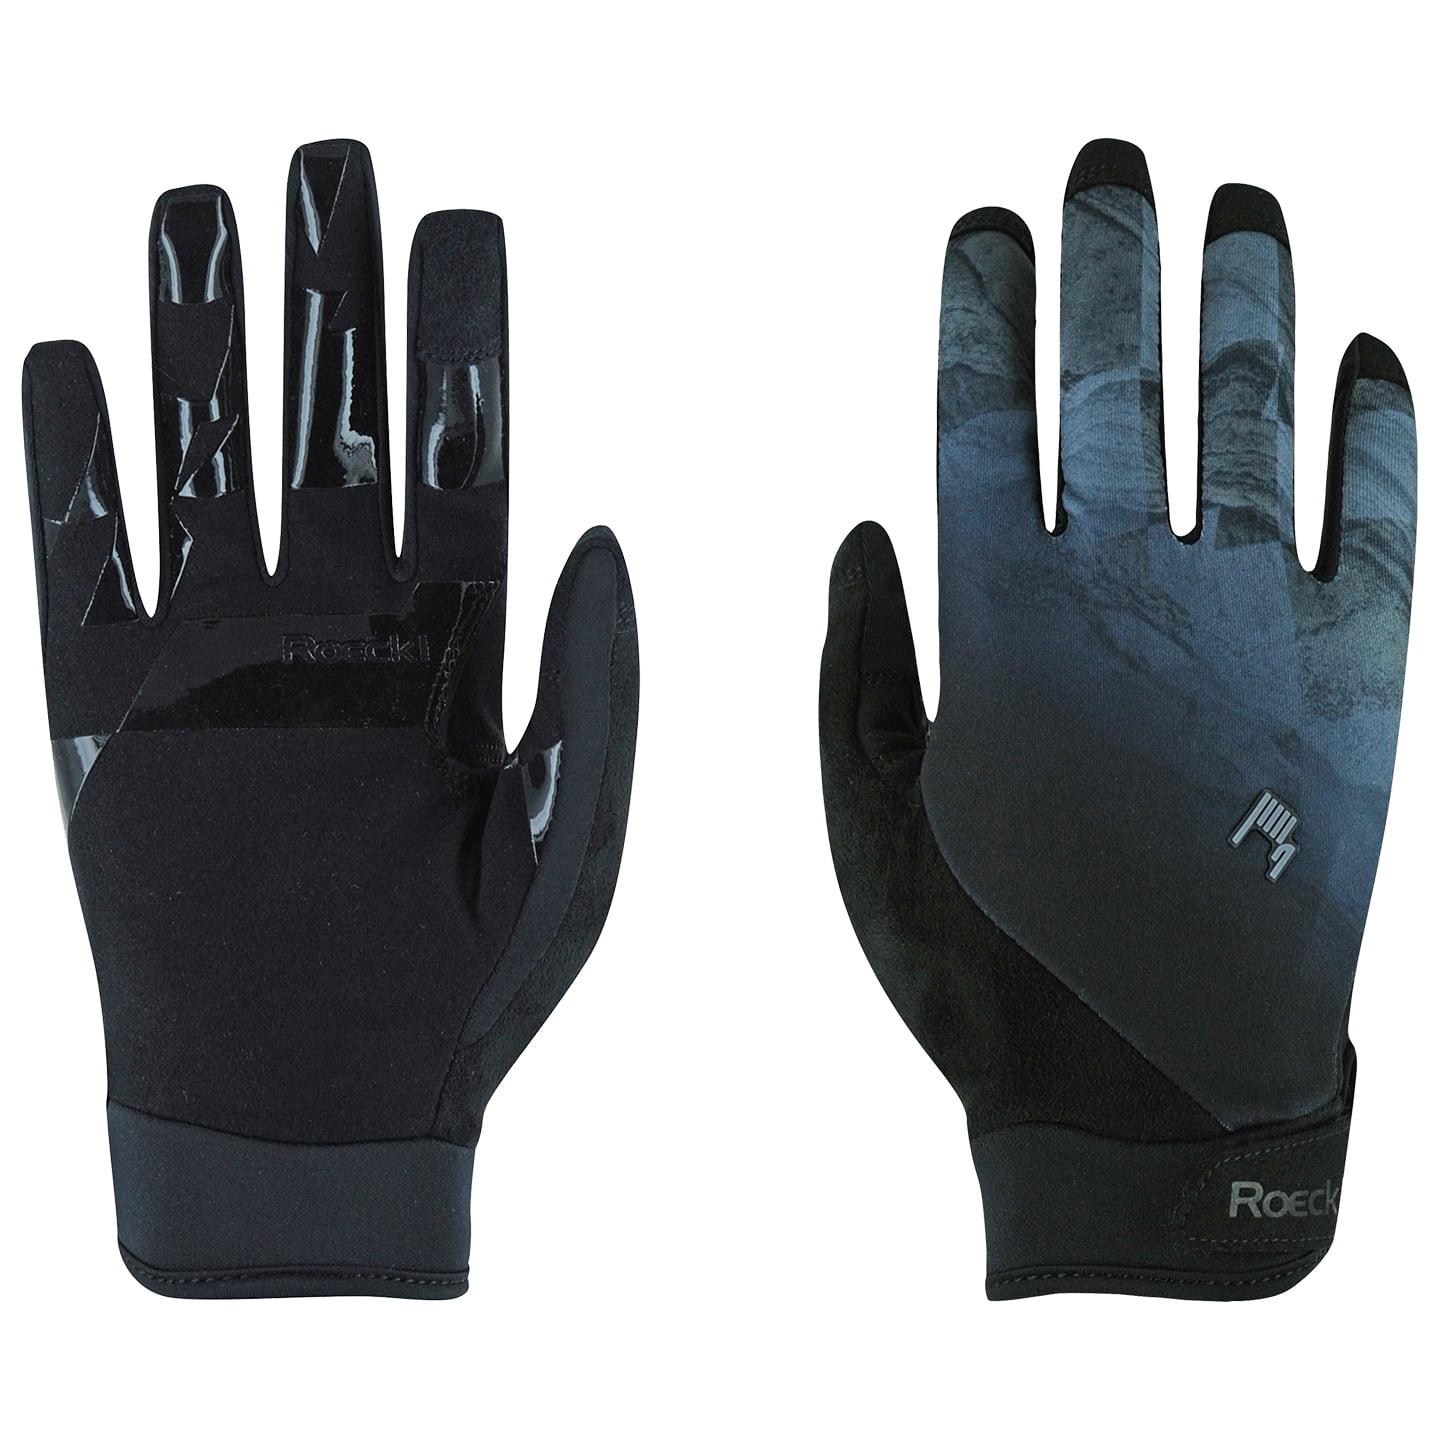 ROECKL Montan Full Finger Gloves Cycling Gloves, for men, size 9,5, Bike gloves, Cycling wear